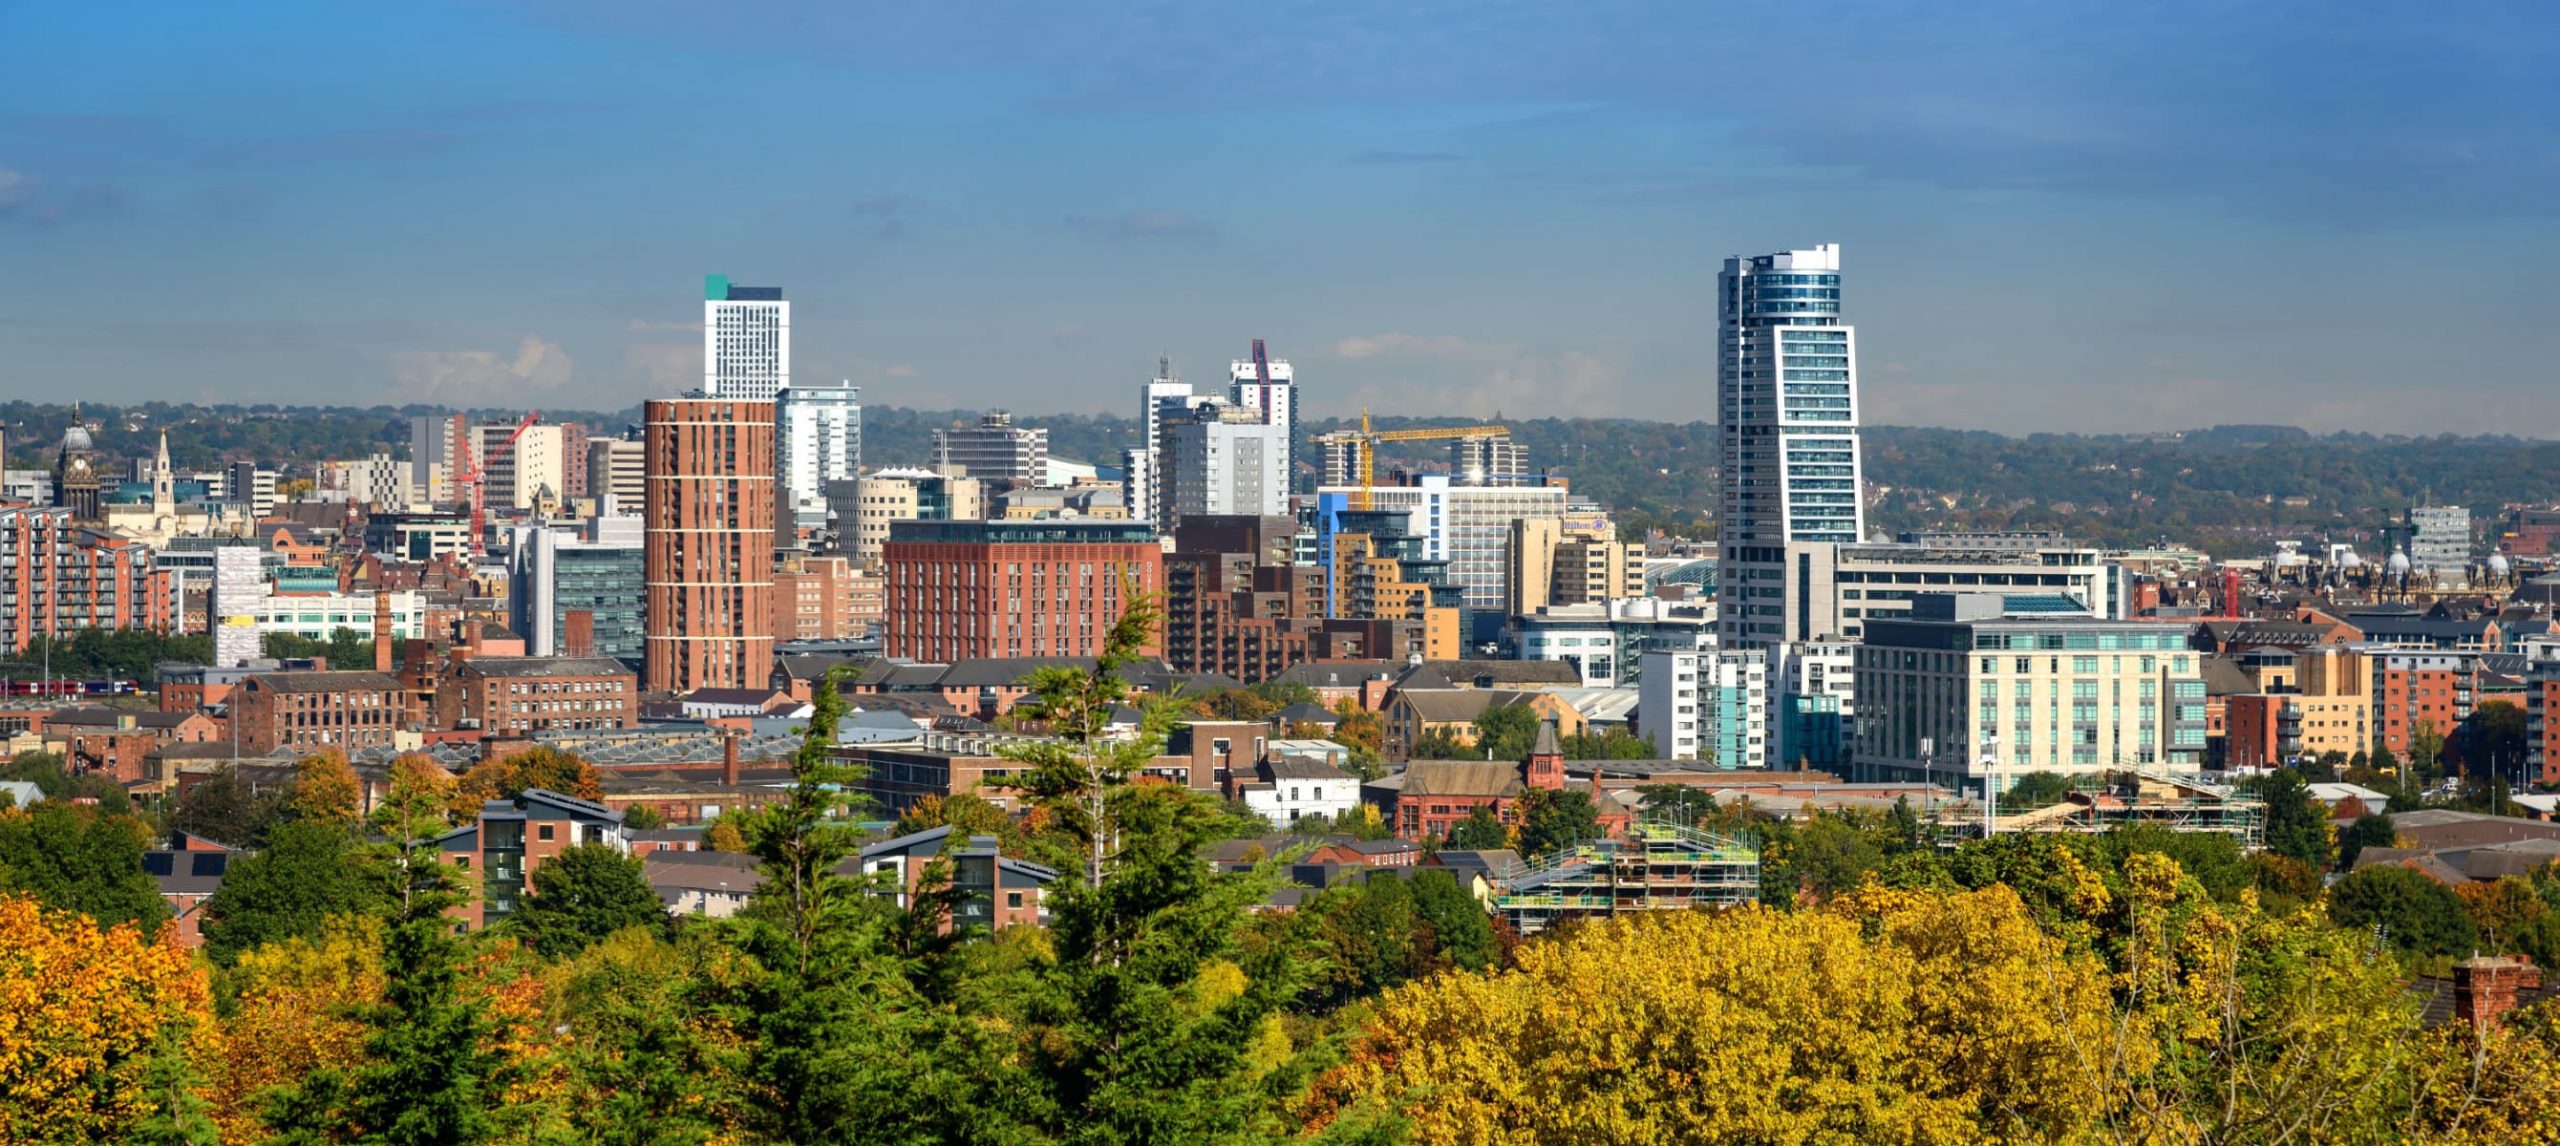 7 Best Things To Do In Leeds, England